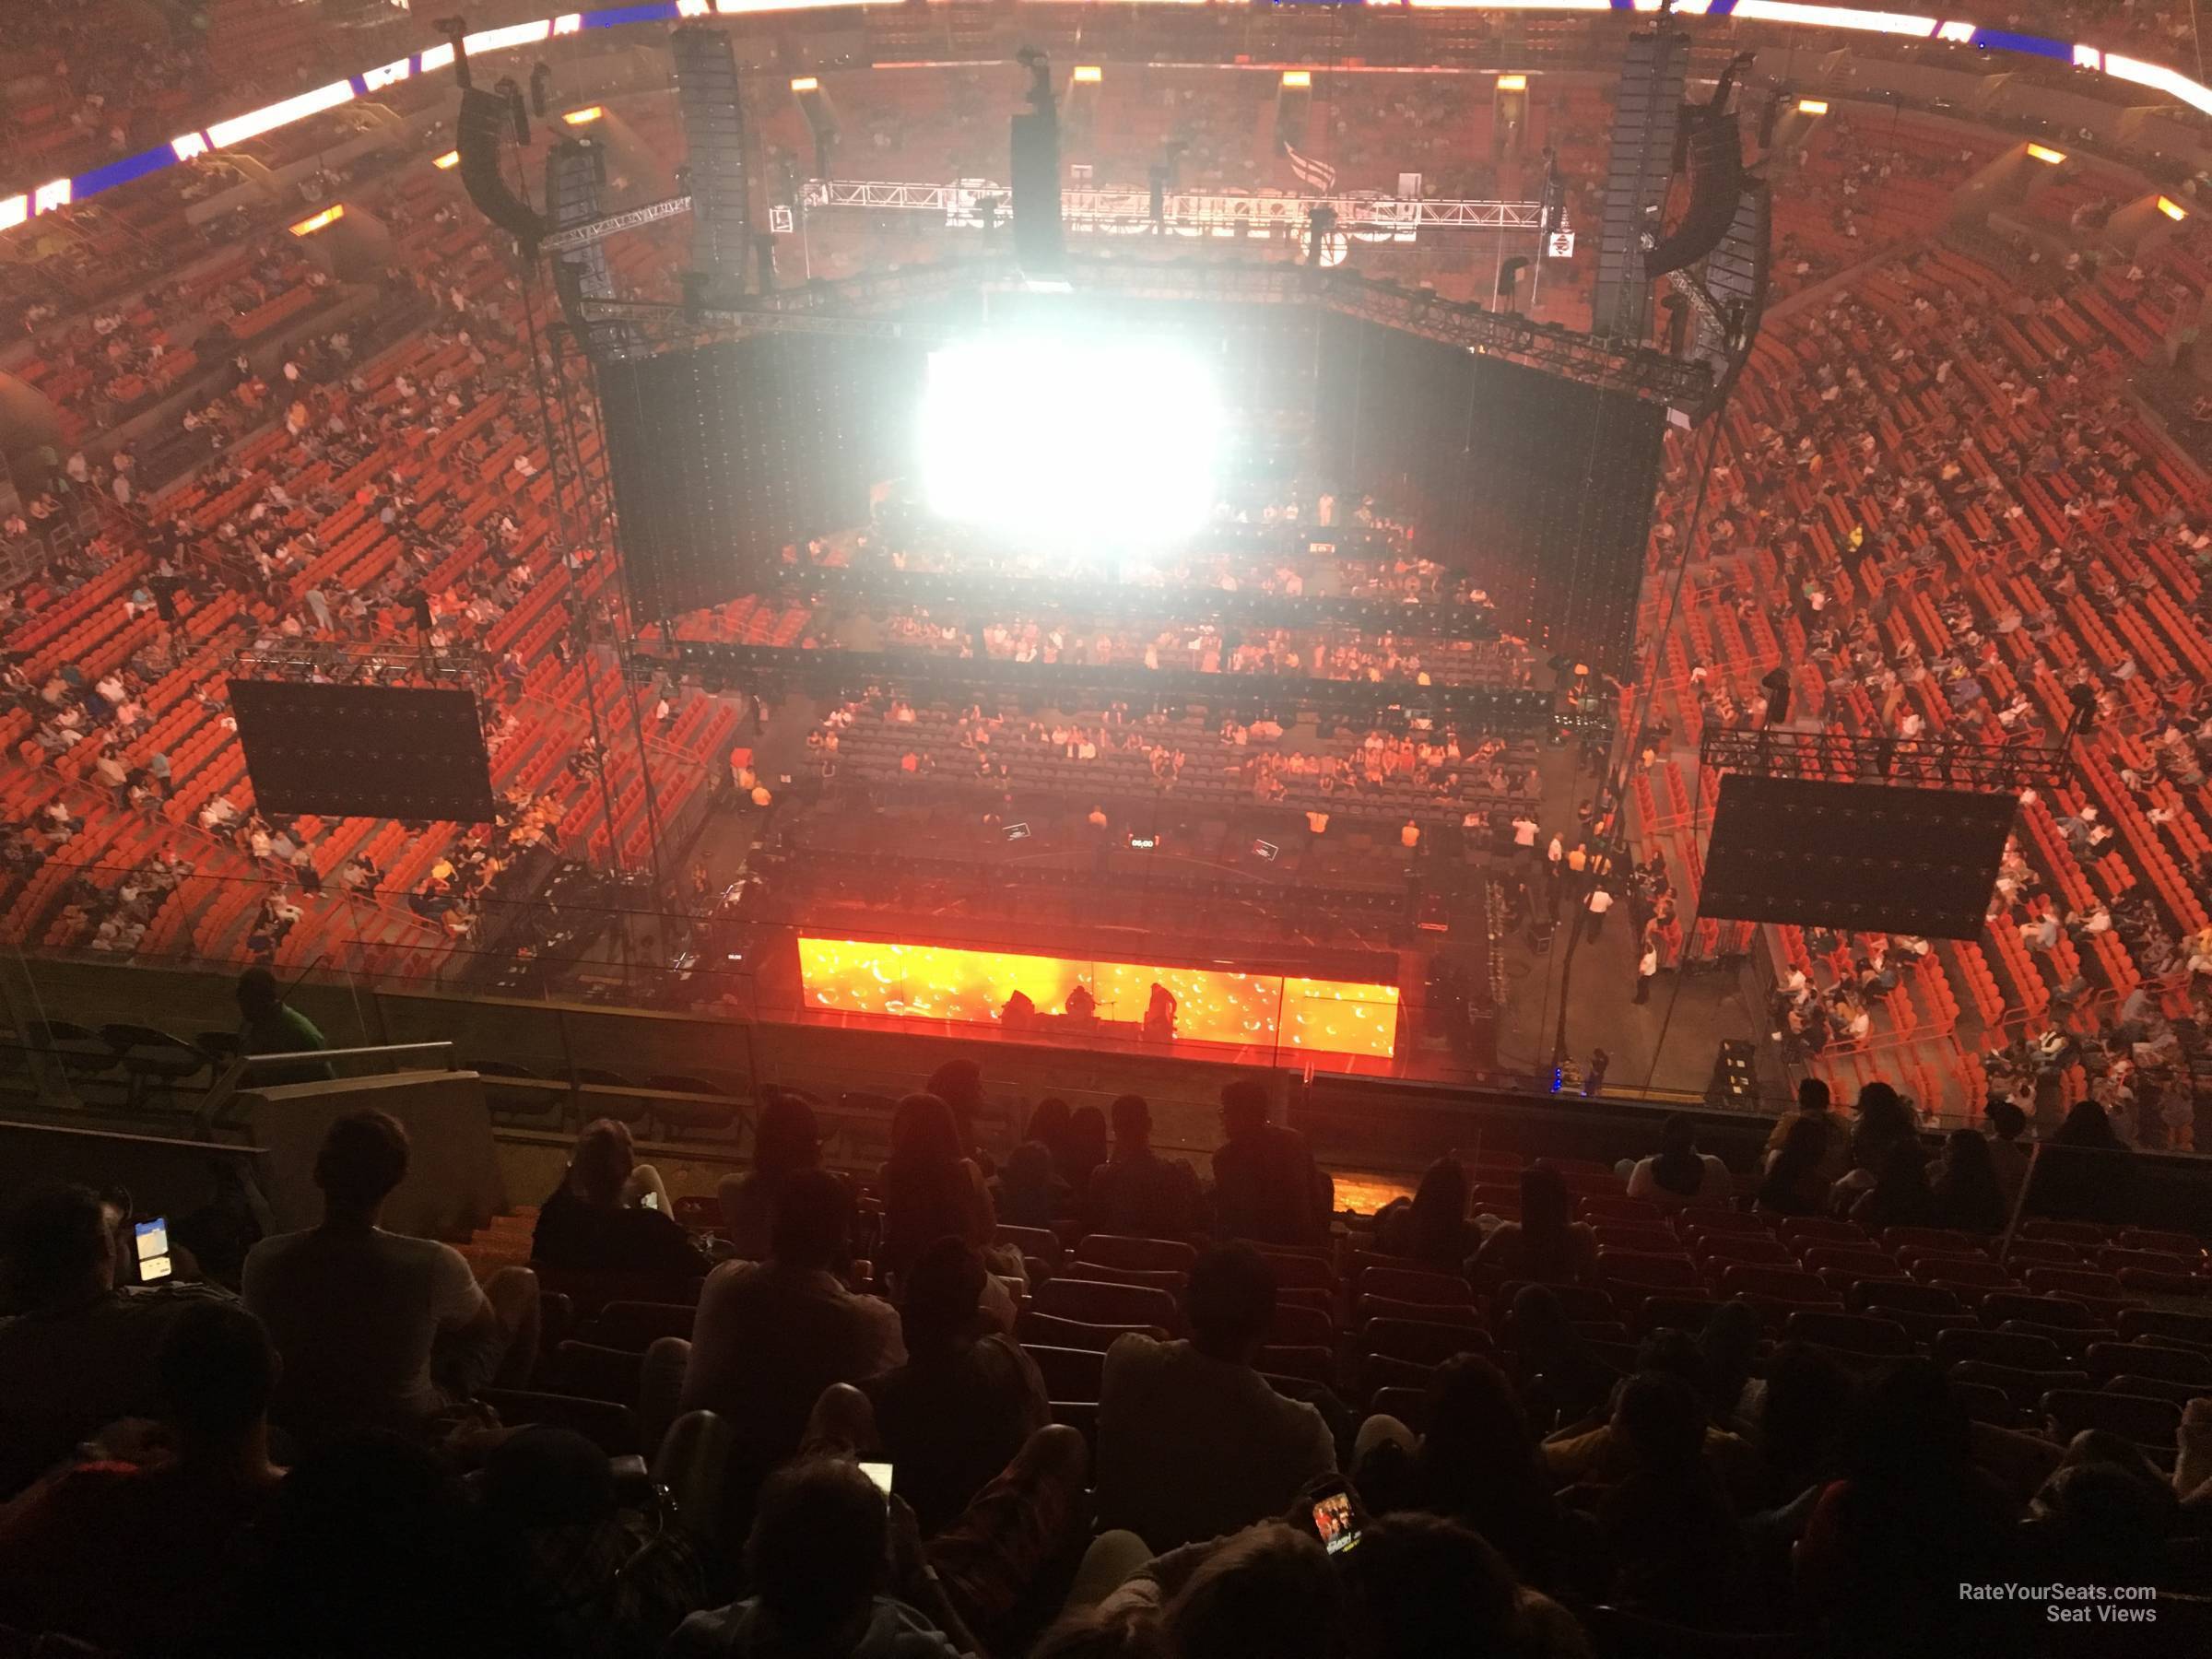 section 405, row 10 seat view  for concert - kaseya center